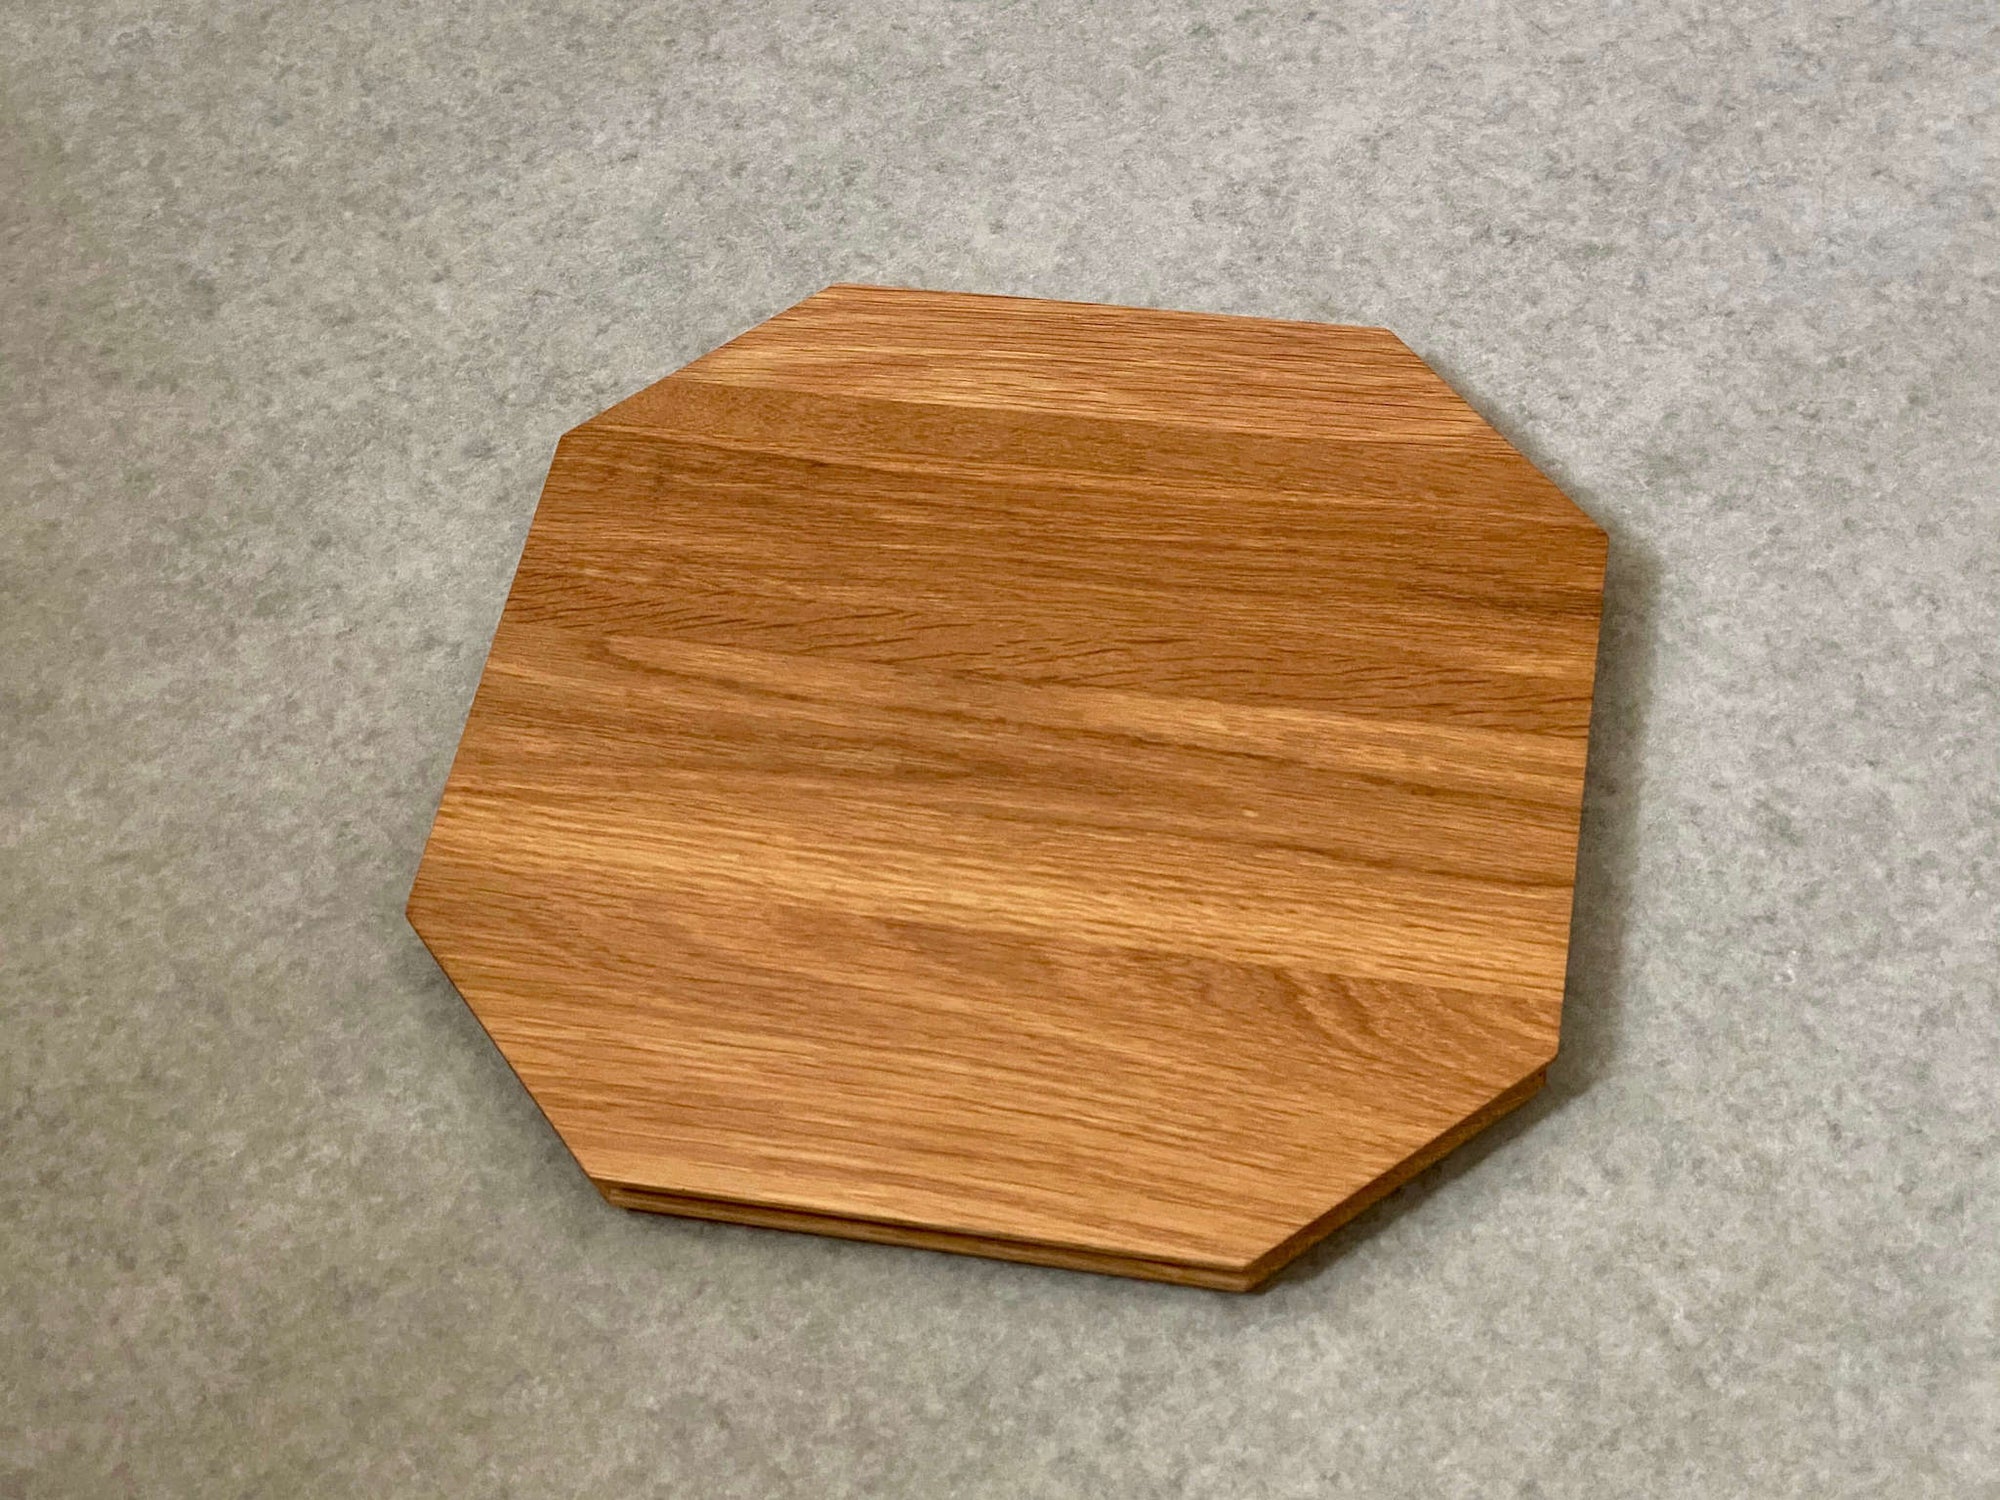 Octagonal shaped cutting and serving board made of cherry. Sculpted edges provide comfortable fingerholds.